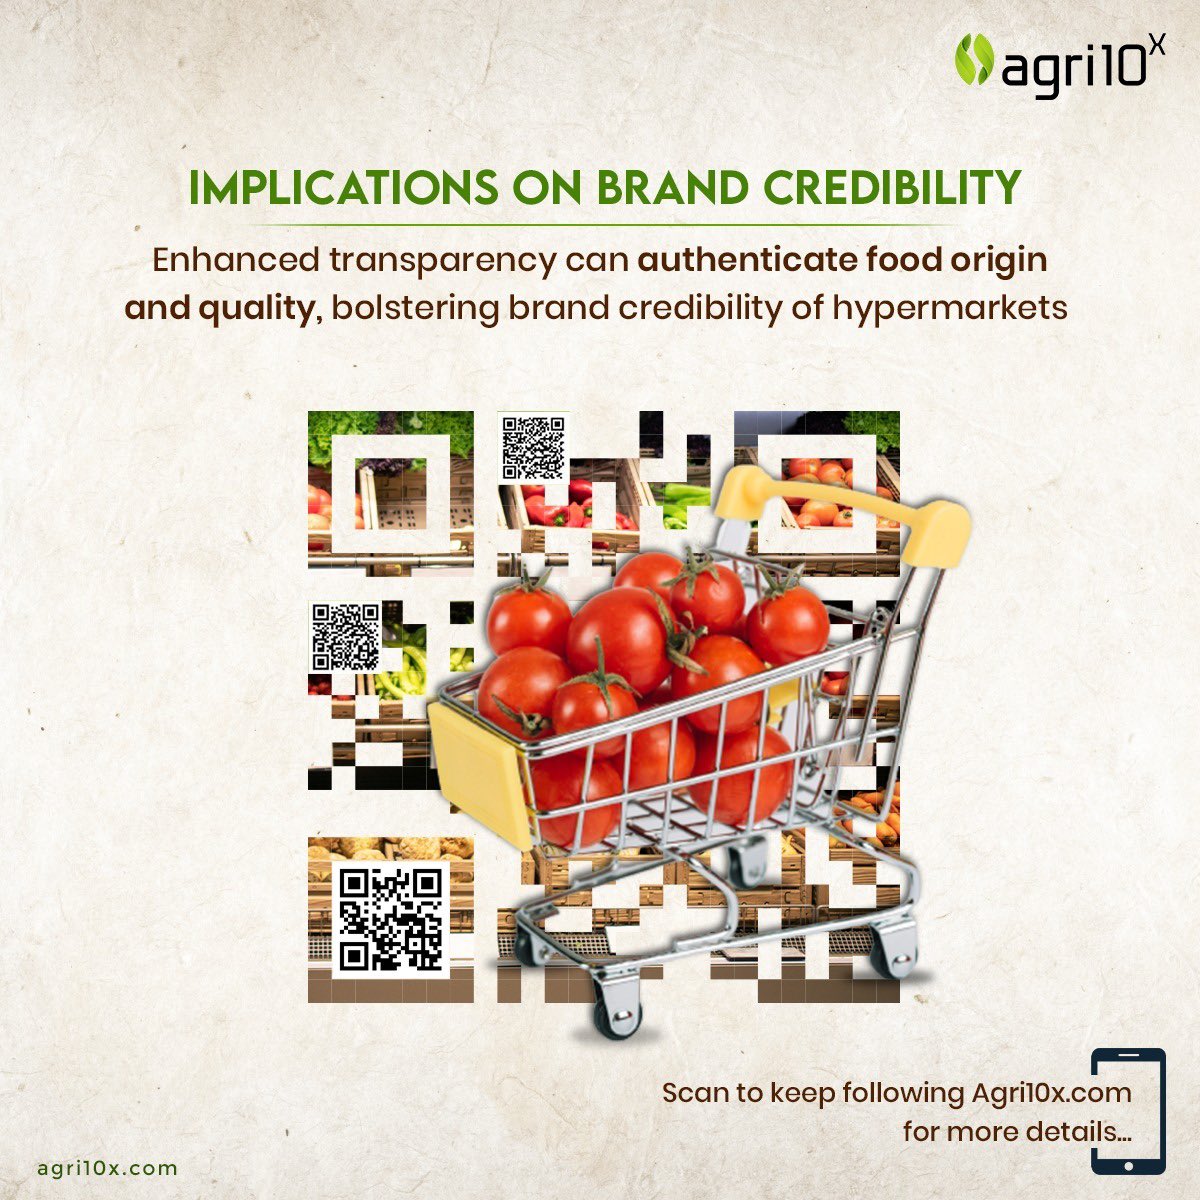 Blockchain in Agriculture can bolster brand credibility via enhanced transparency by authenticating food quality. #BlockchaininAgriculture #AgriTech #Agri10X